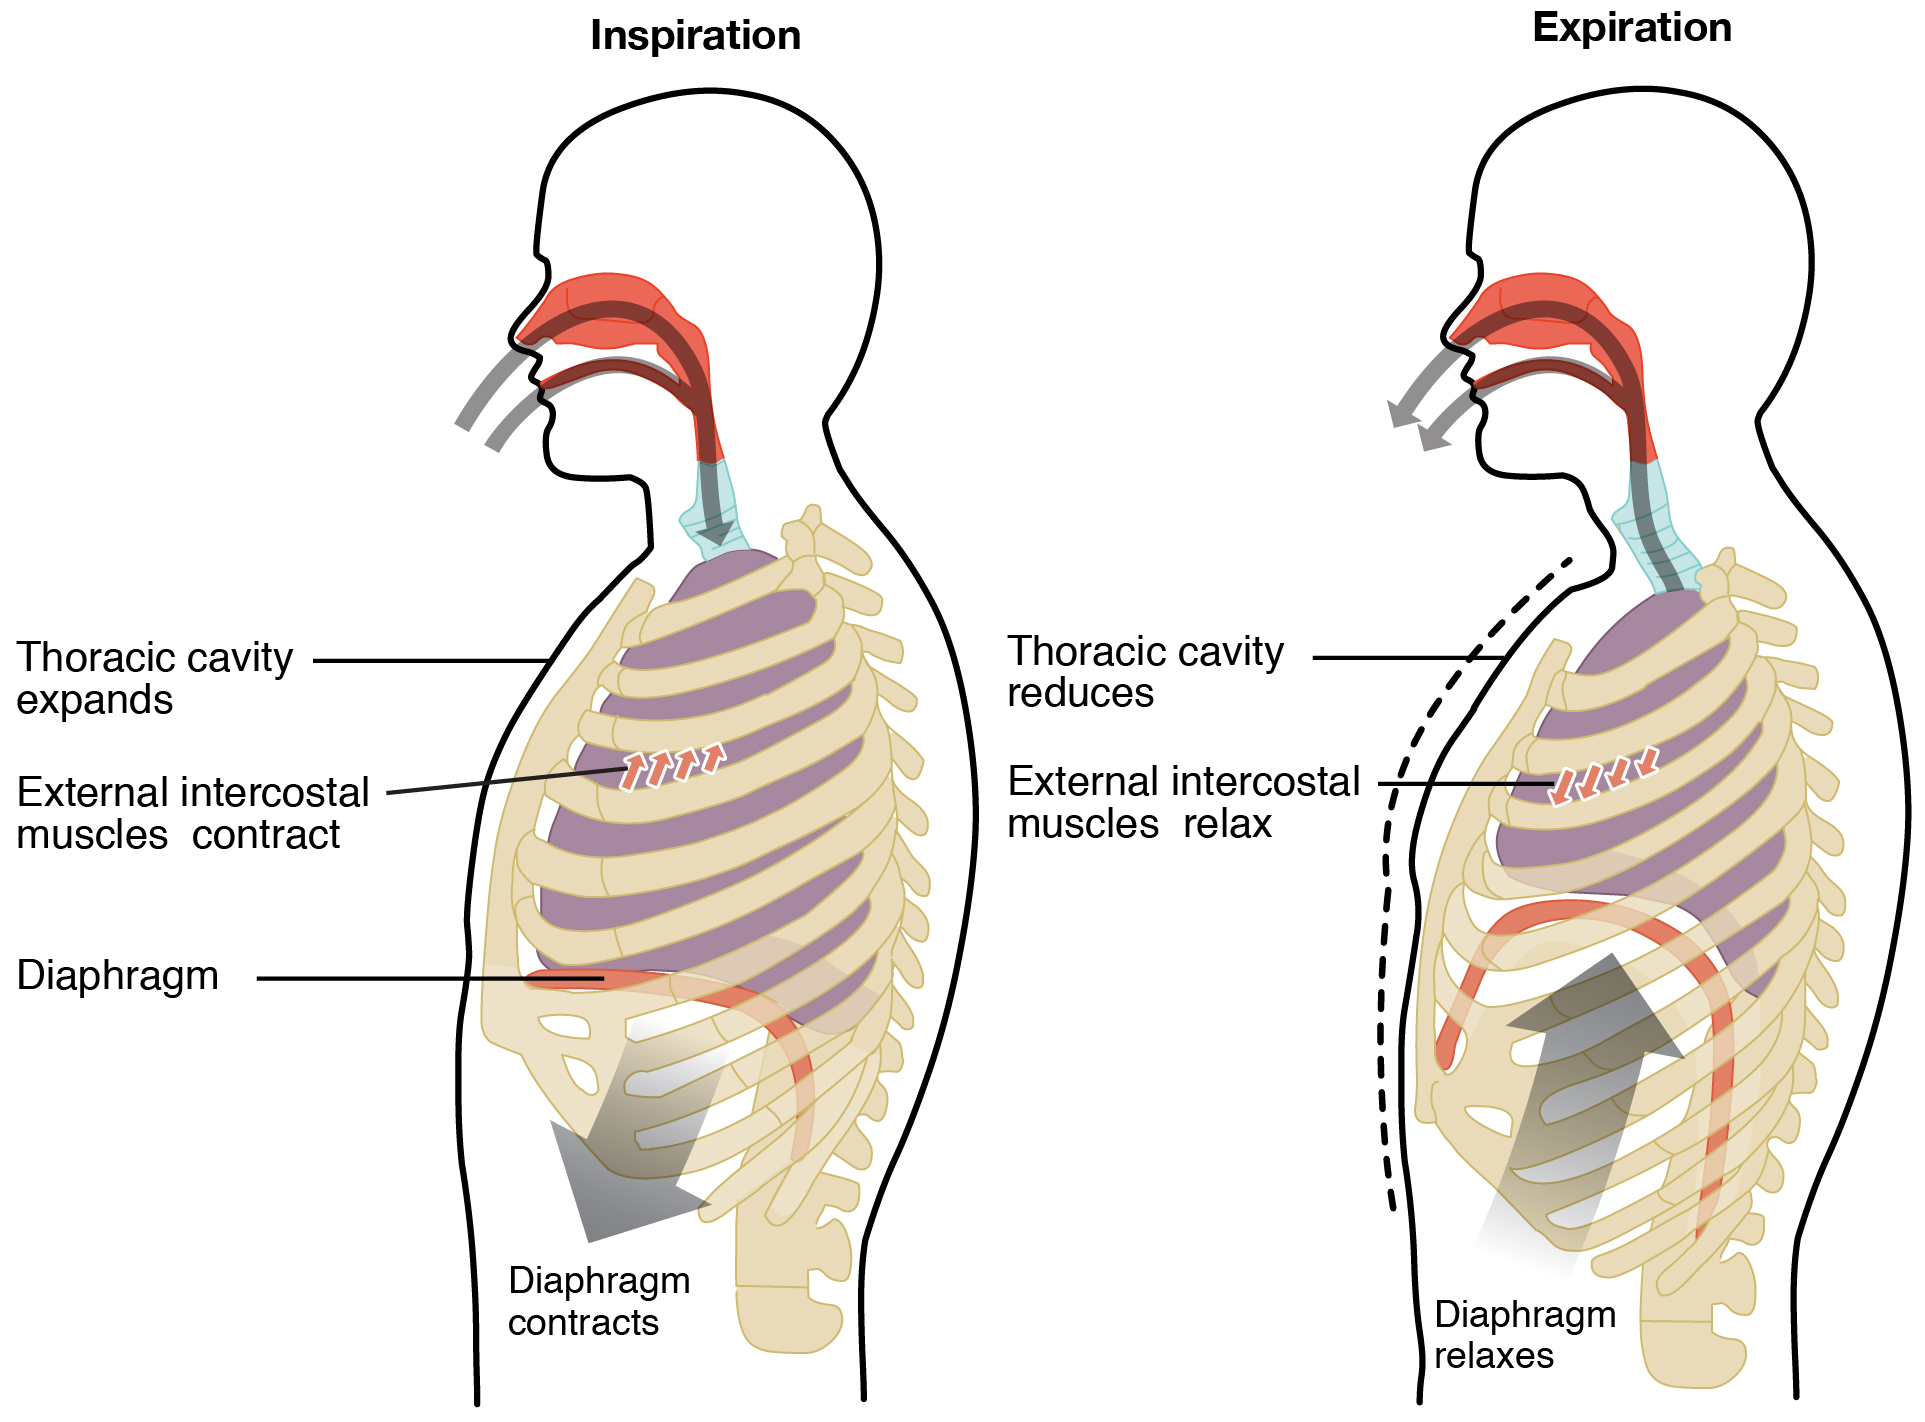 The left panel of this image shows a person inhaling air and the location of the chest muscles. The right panel shows the person exhaling air and the contraction of the thoracic cavity.